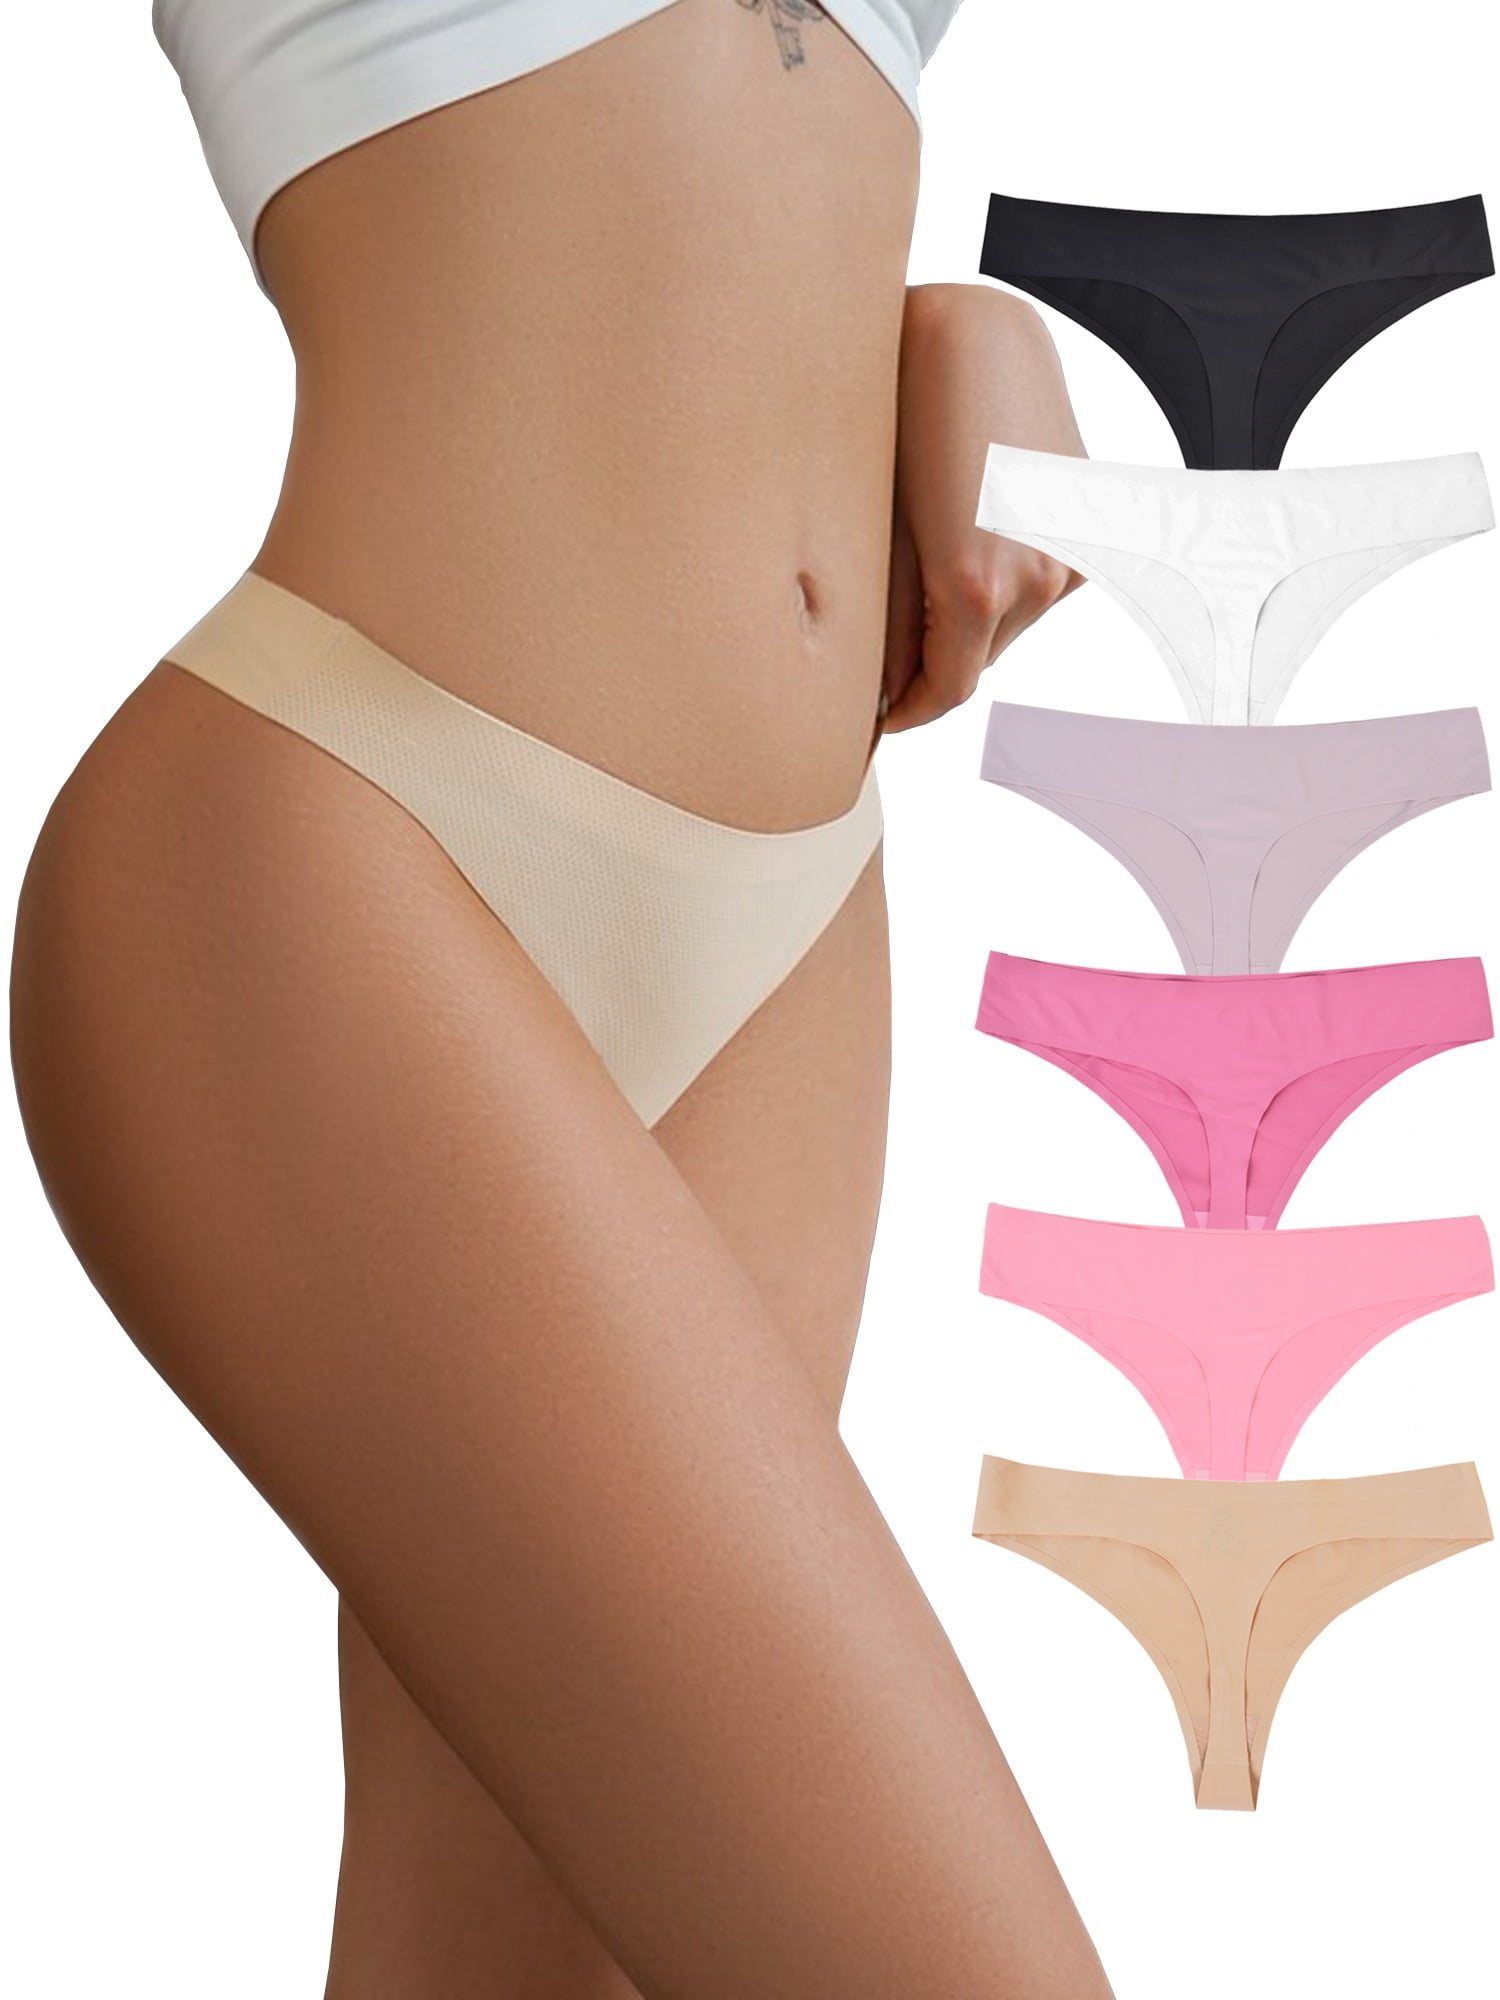 Sick of visible underwear, visible panty lines, never actually